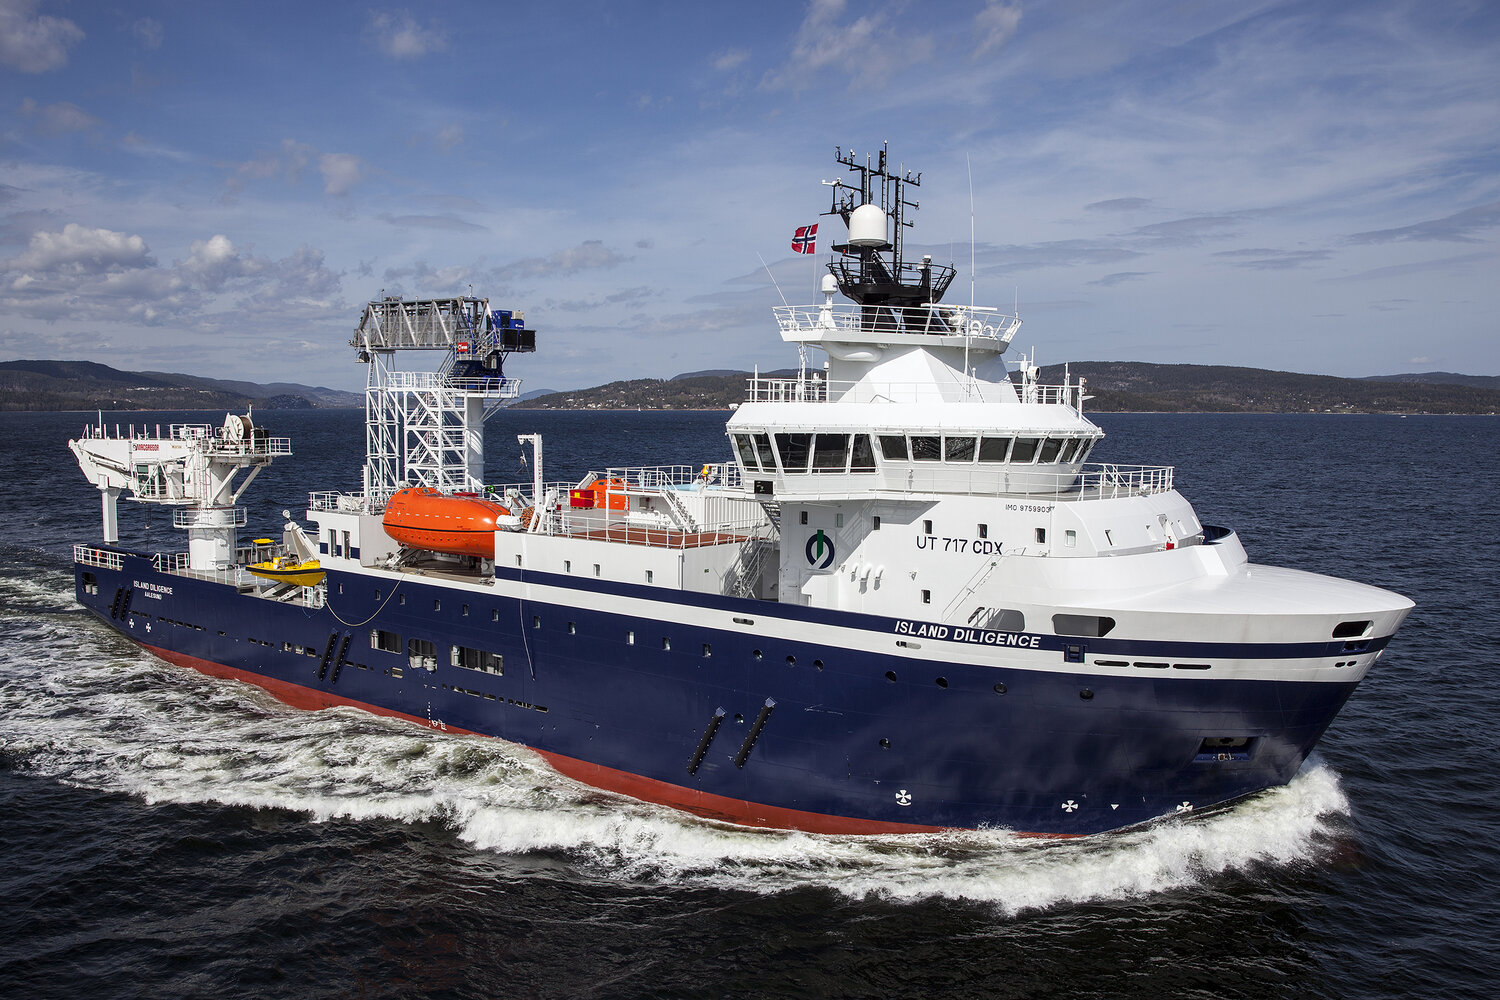 A photo of the Island Diligence vessel at sea